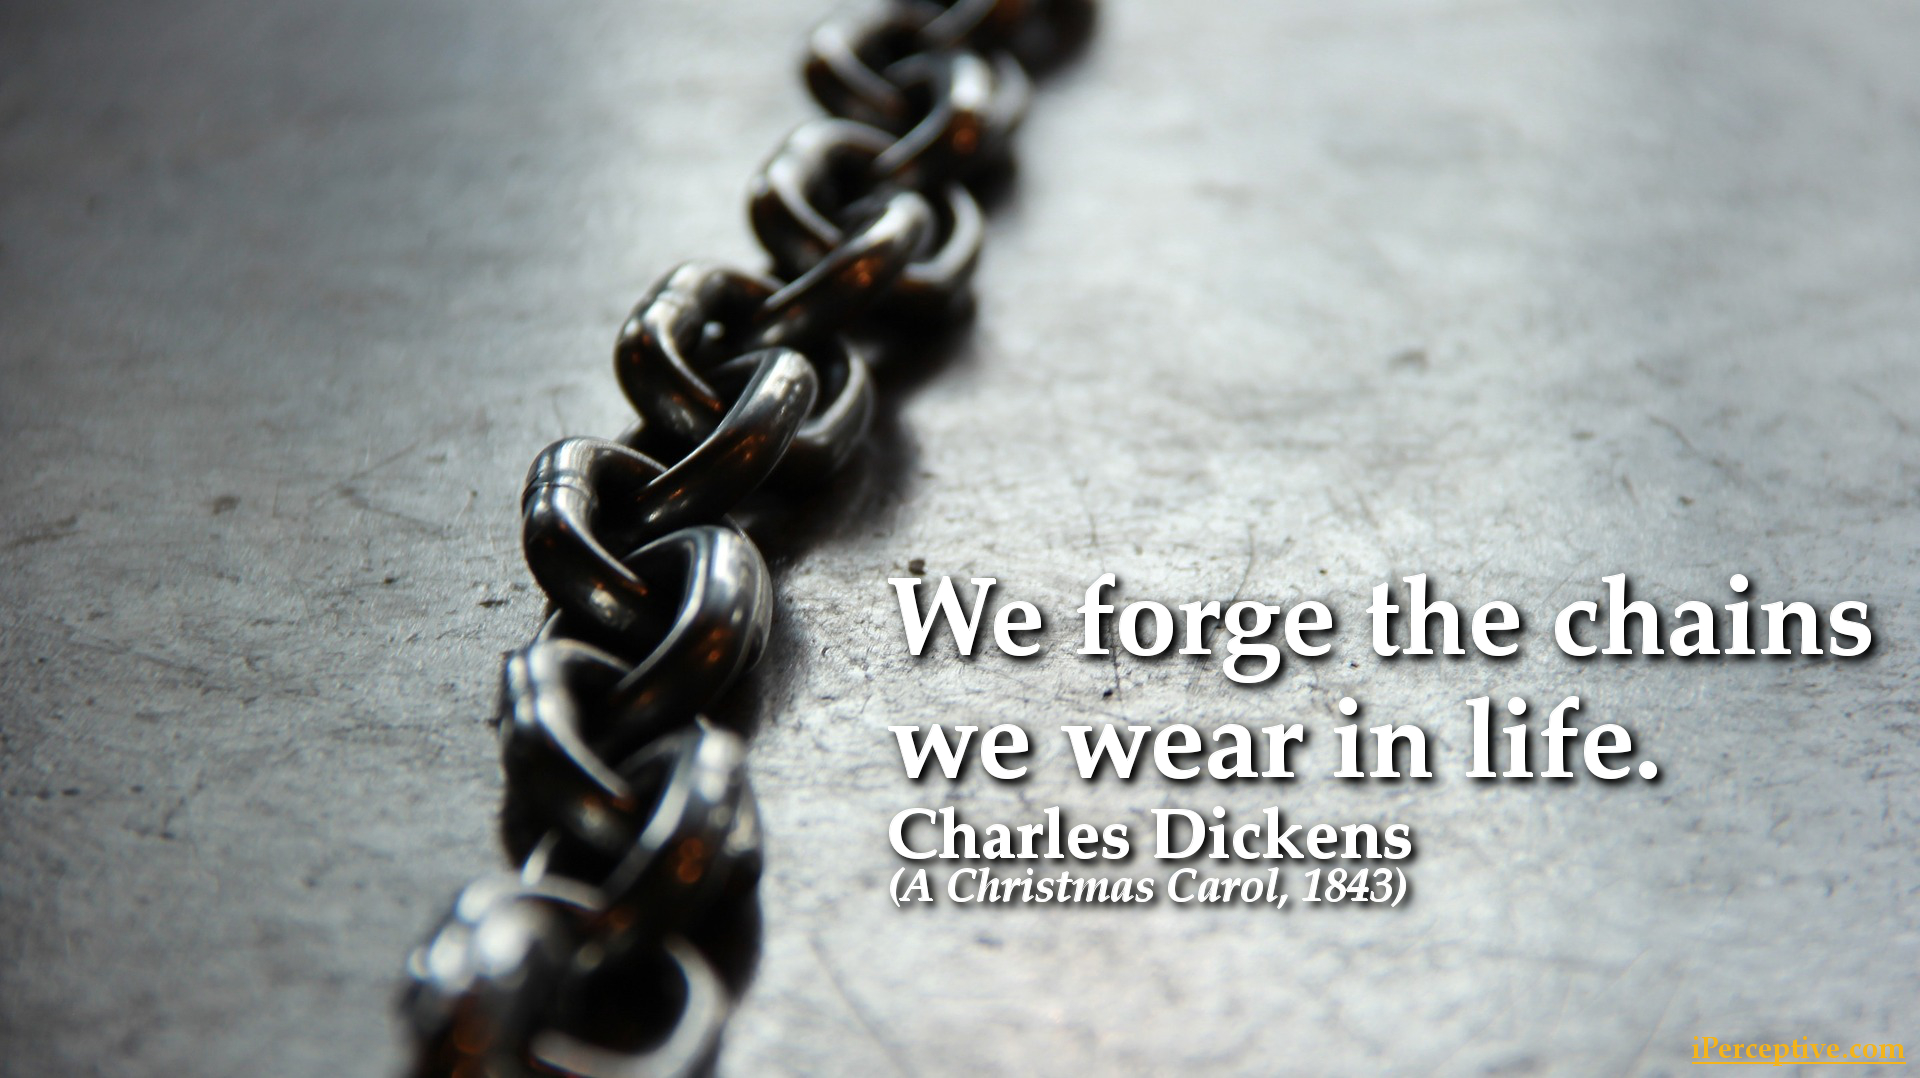 Charles Dickens Quote: We forge the chains we wear in life...